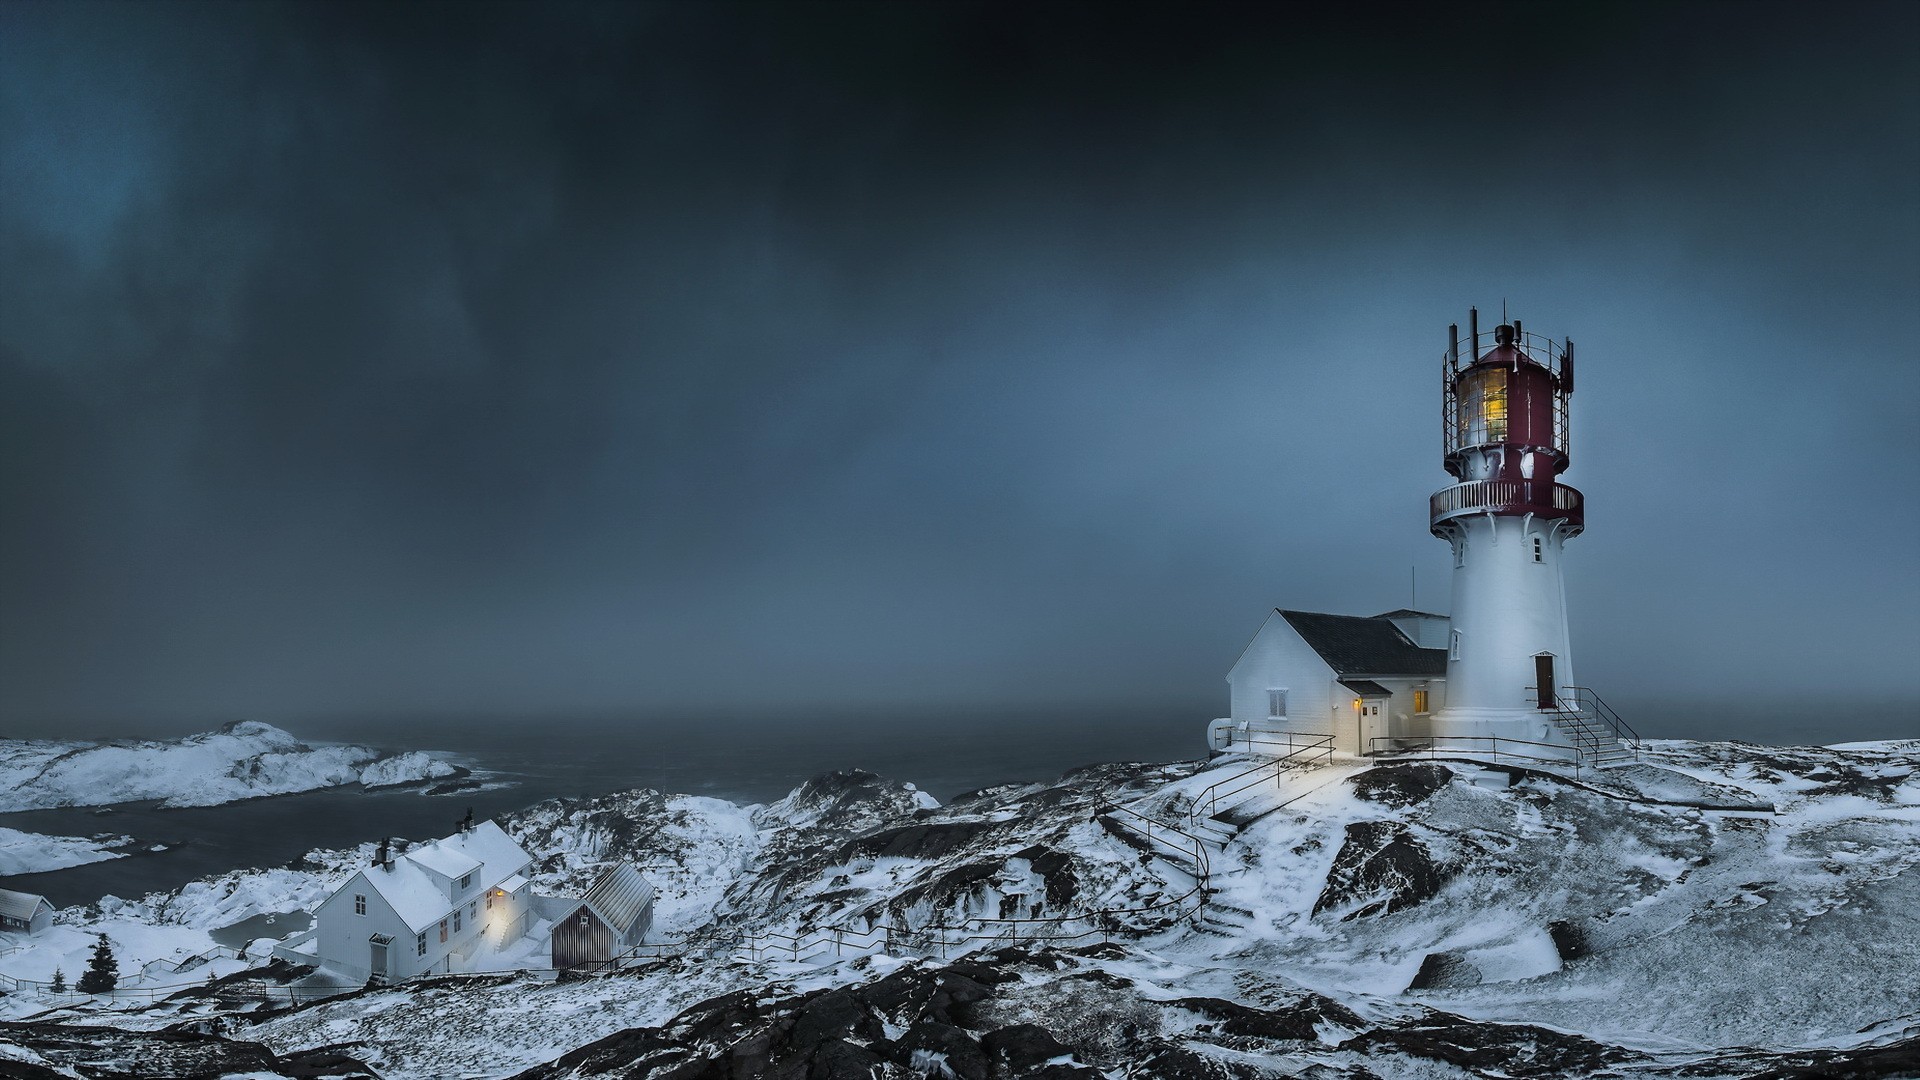 General 1920x1080 nature landscape clouds trees Norway lighthouse winter snow fence rocks sea storm house lights